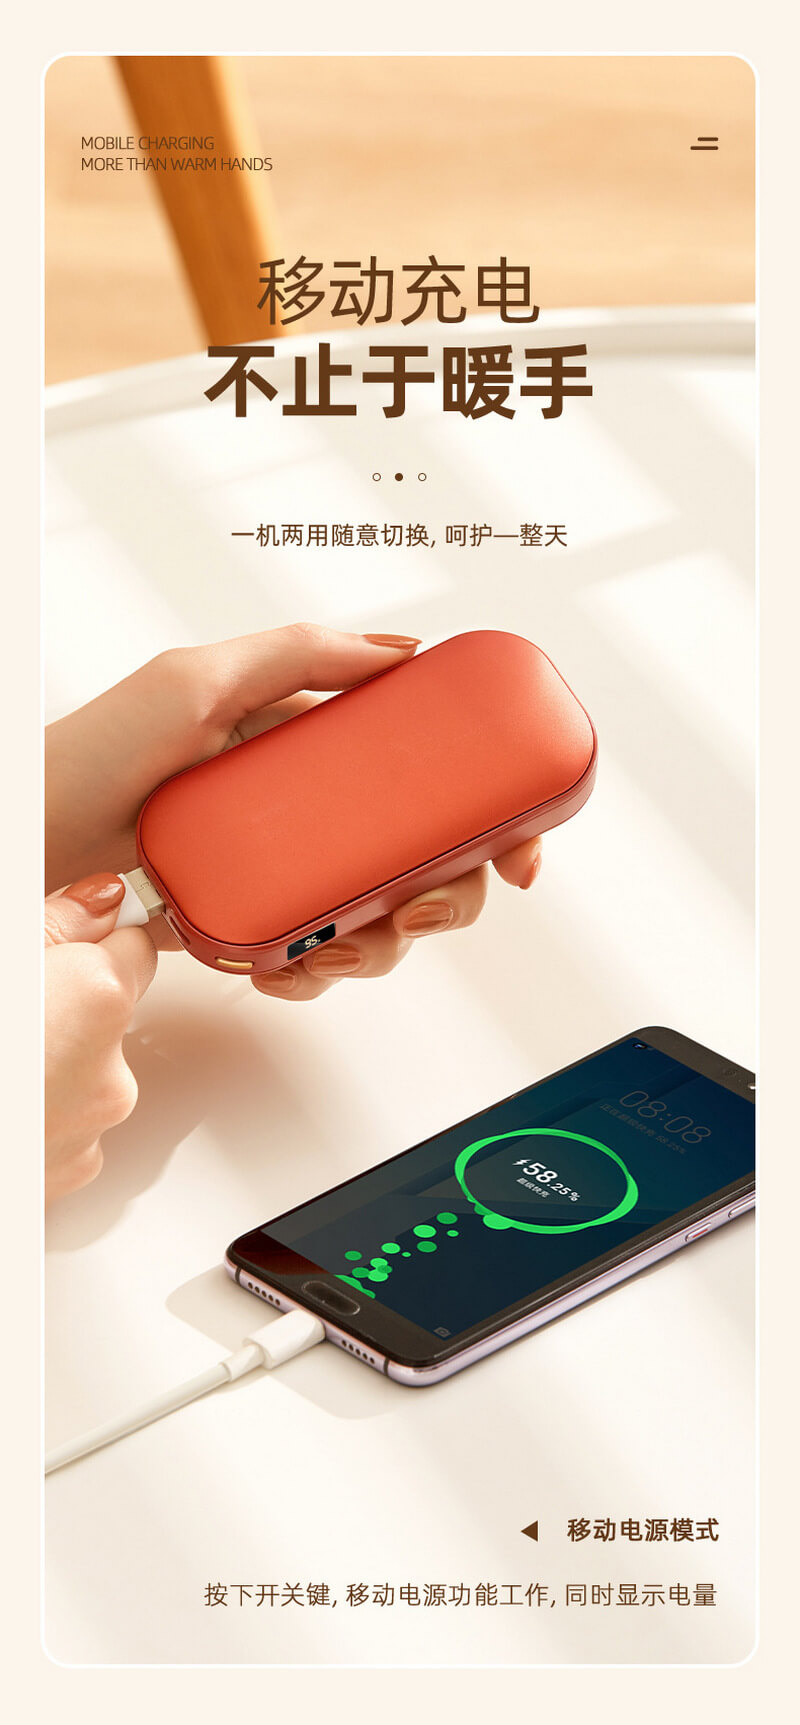 anran usb hand warmer two in one self heating power bank10